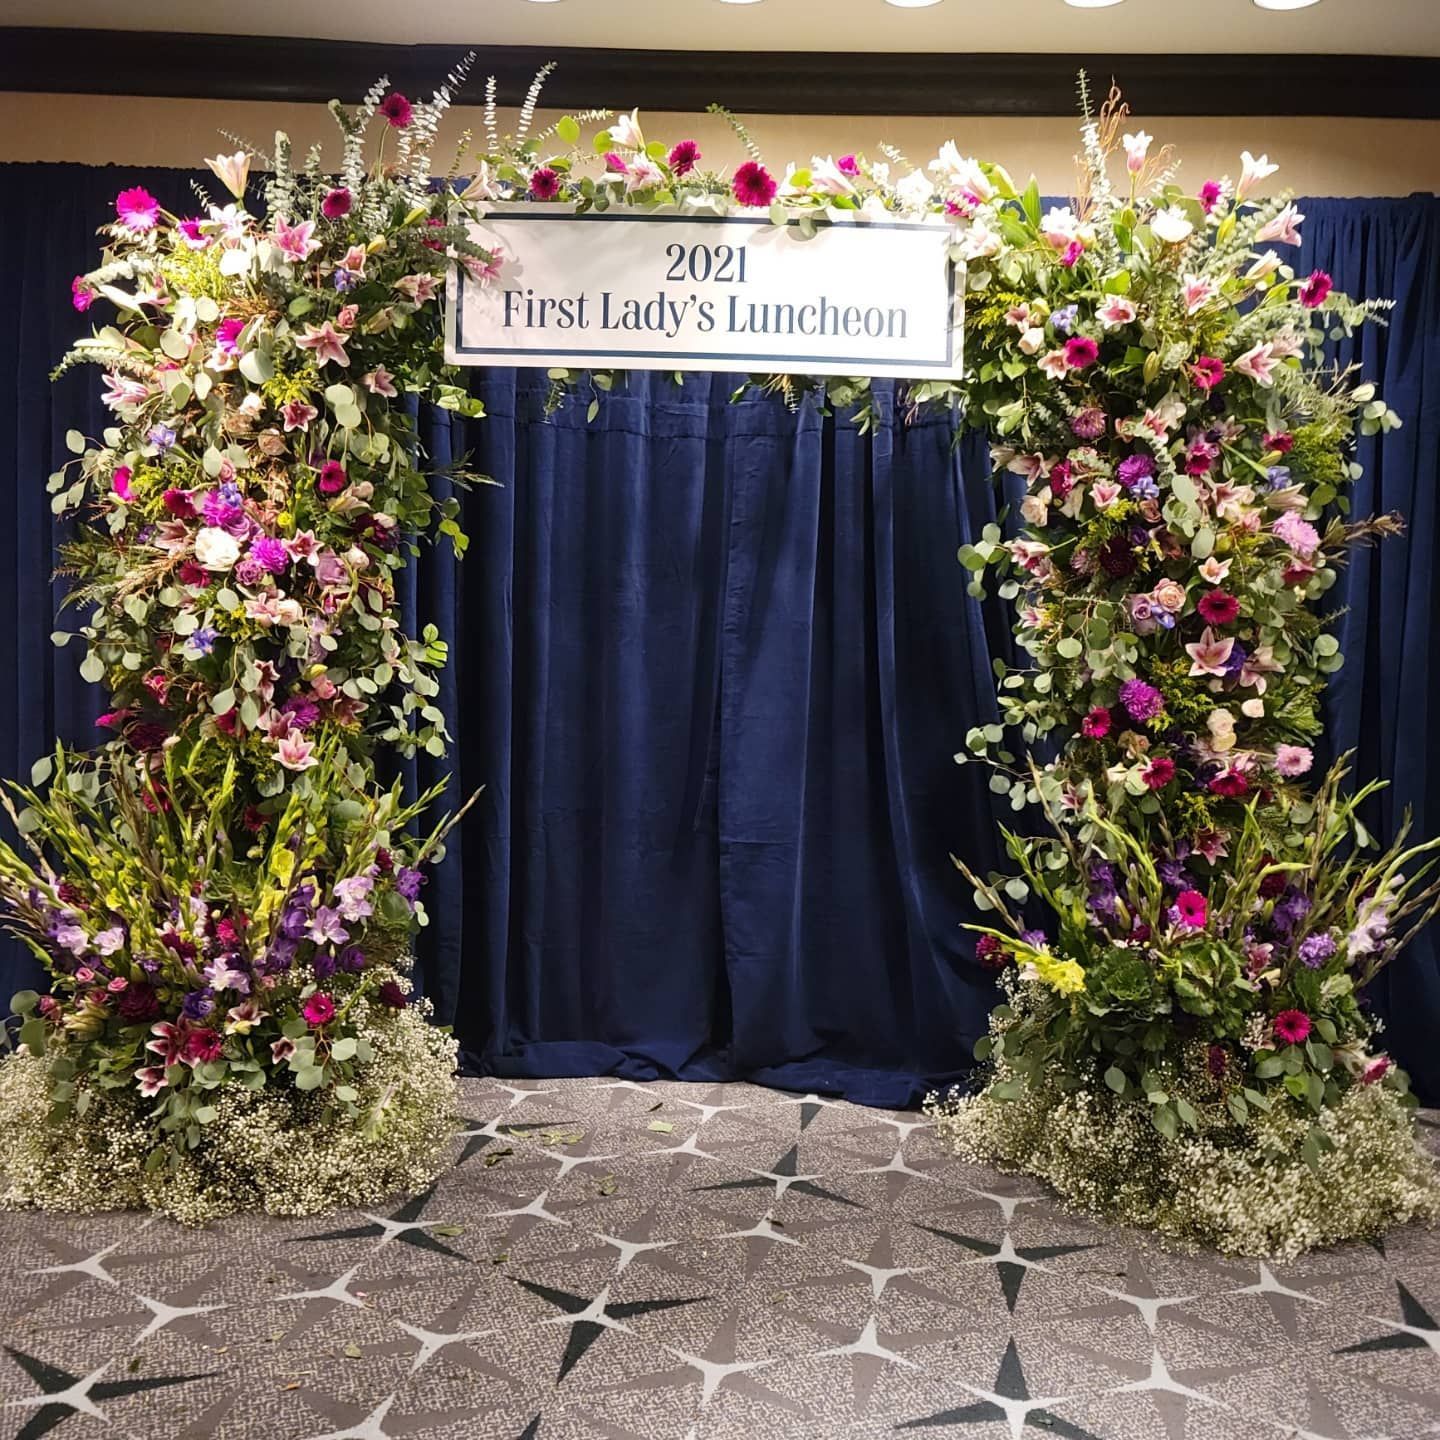 Tulips Floral Design located in Westbrook, CT creates beautiful floral designs for your special events.